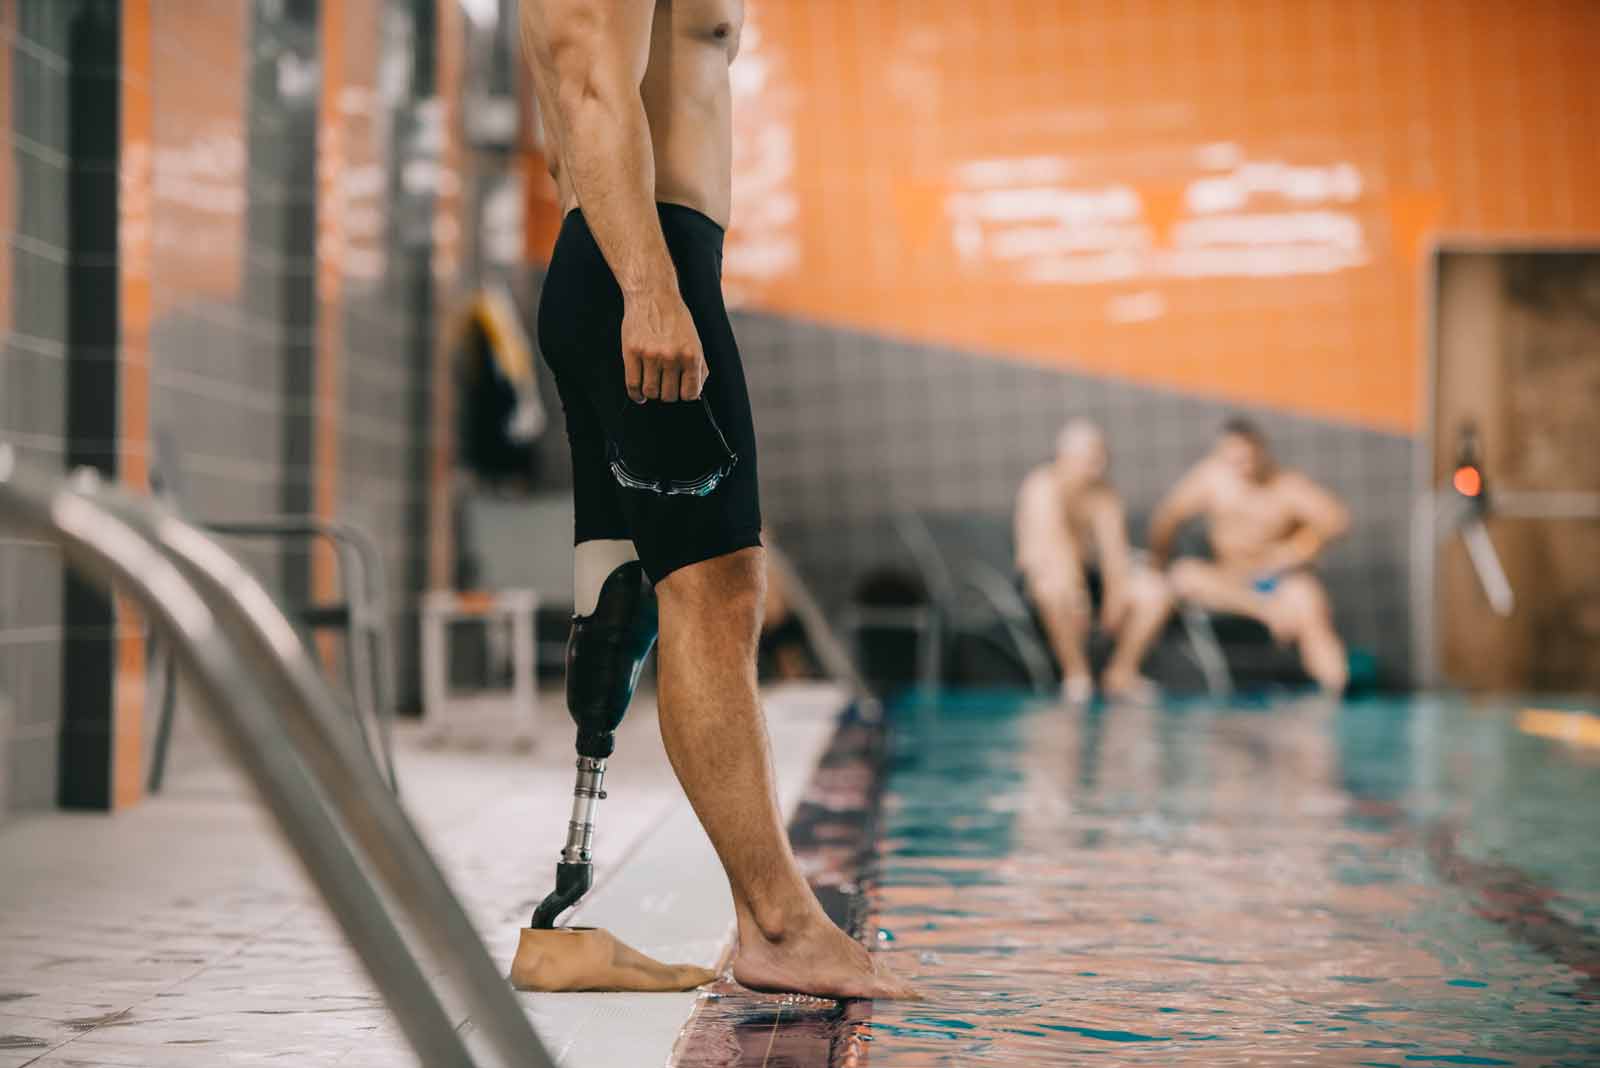 sportsman with prosthetic leg standing on poolside